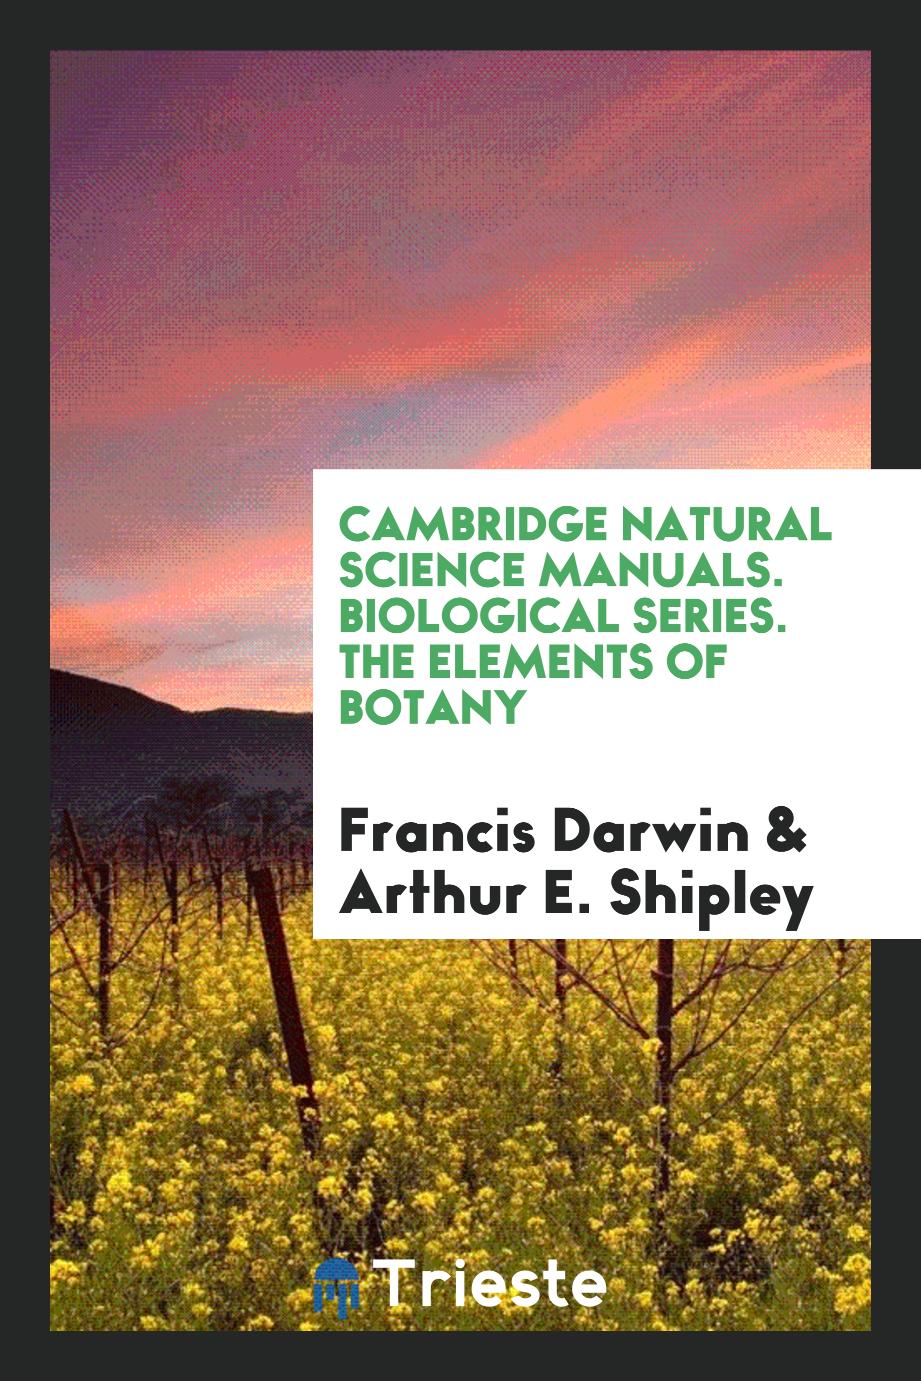 Cambridge Natural Science Manuals. Biological Series. The Elements of Botany